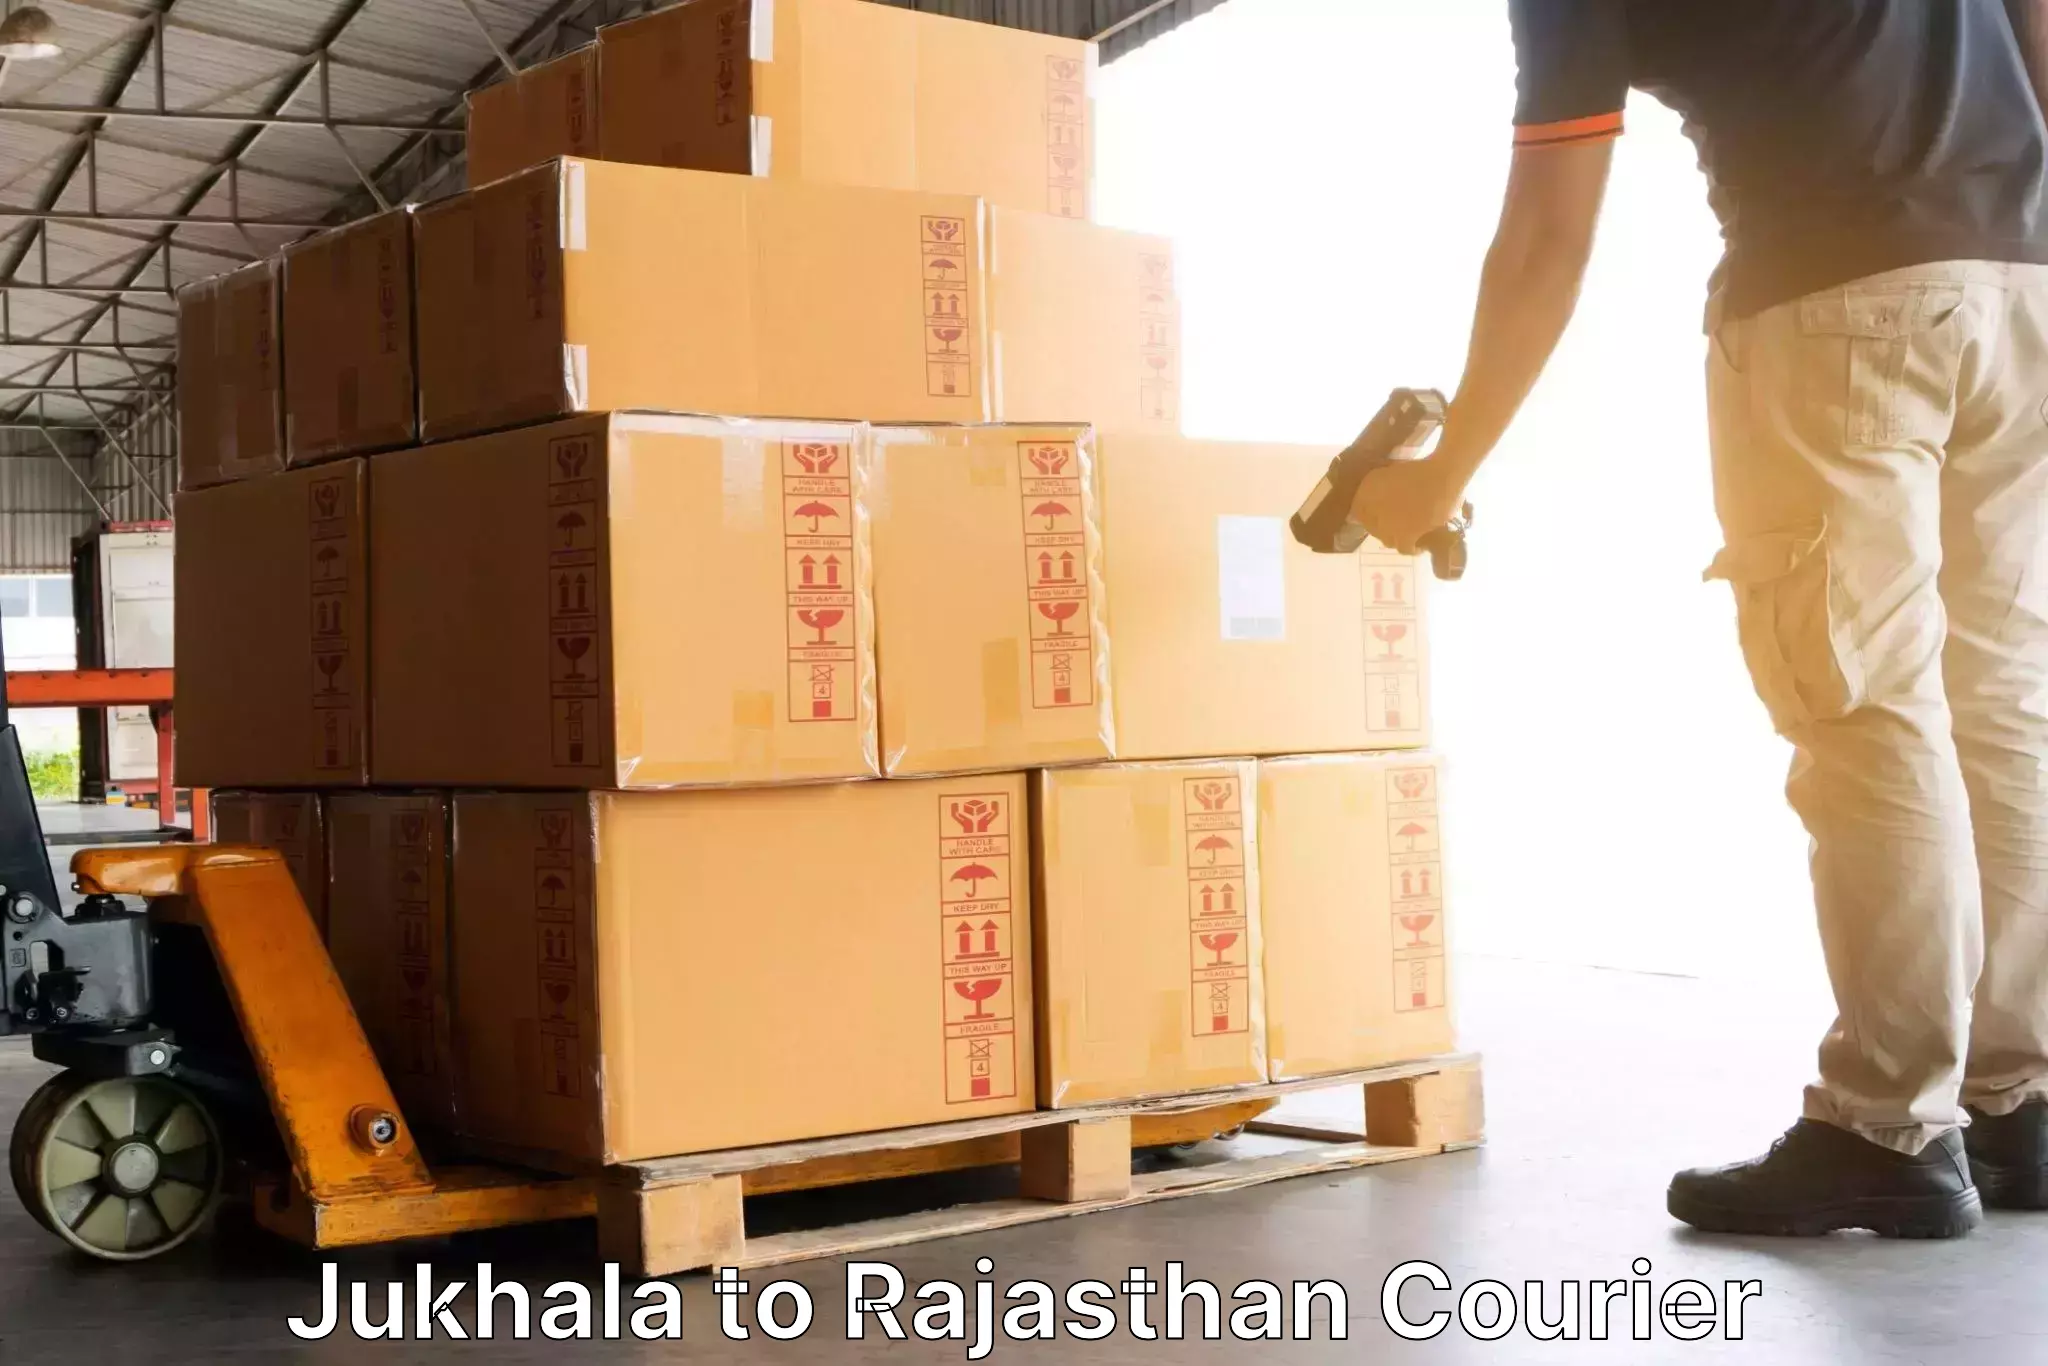 State-of-the-art courier technology Jukhala to Rajgarh Rajasthan